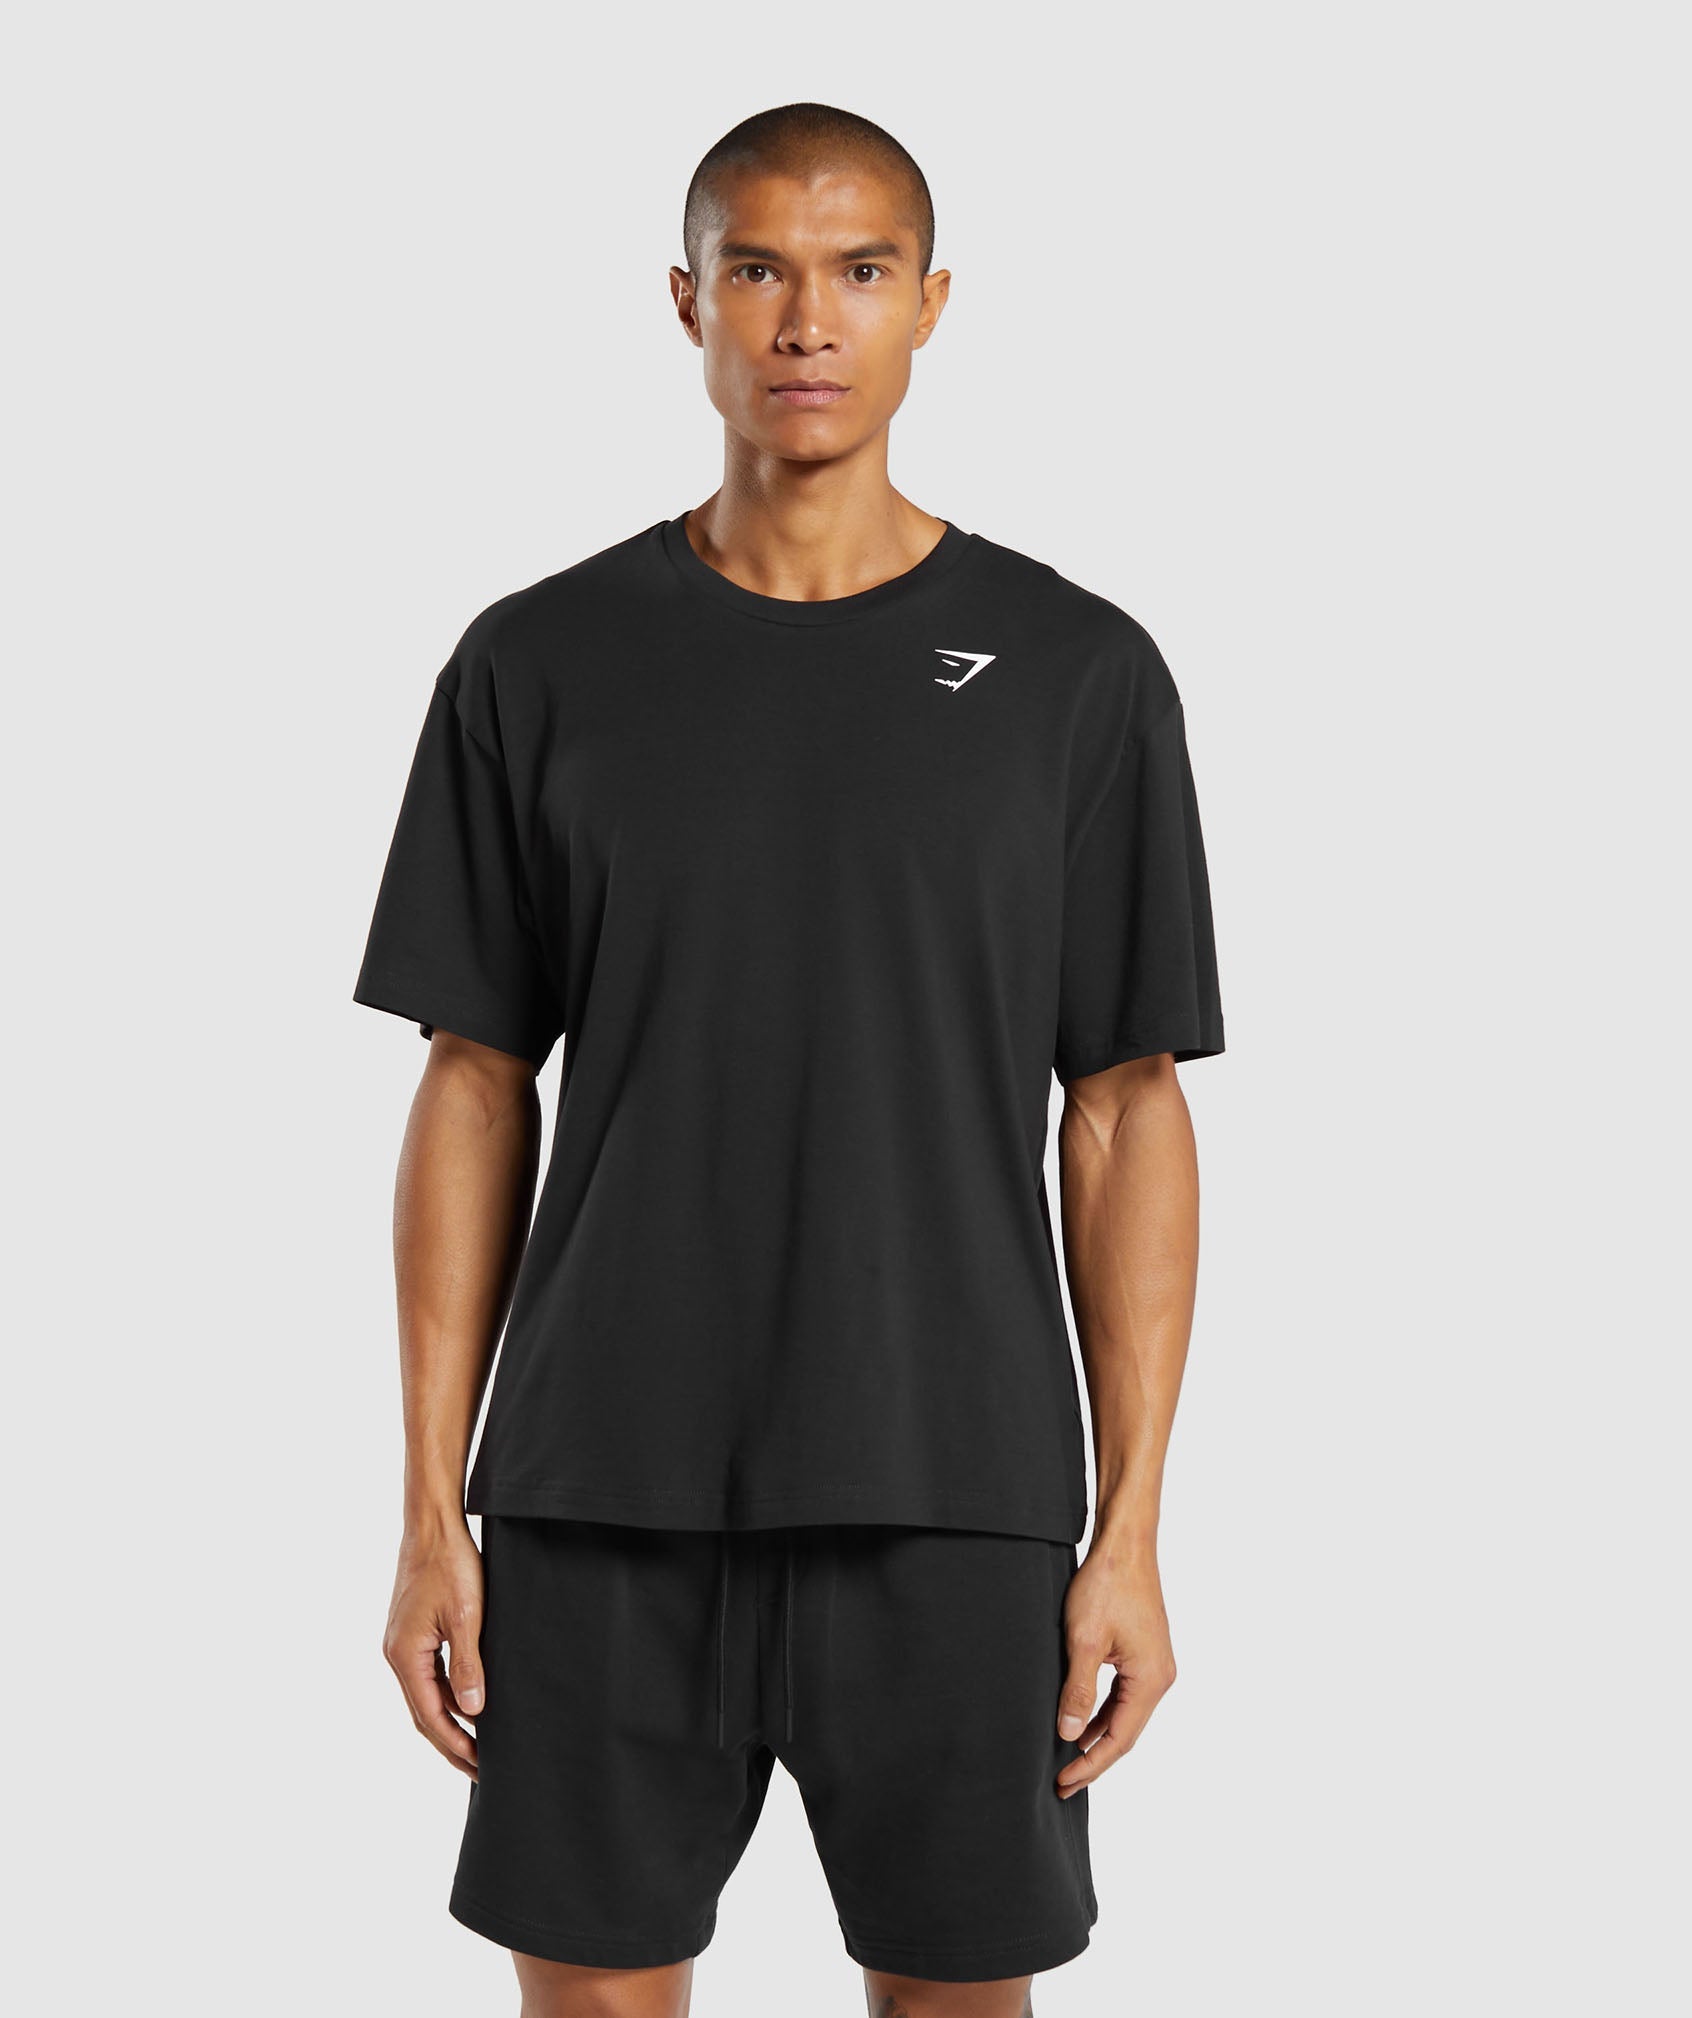 Essential Oversized T-Shirt in Black - view 1